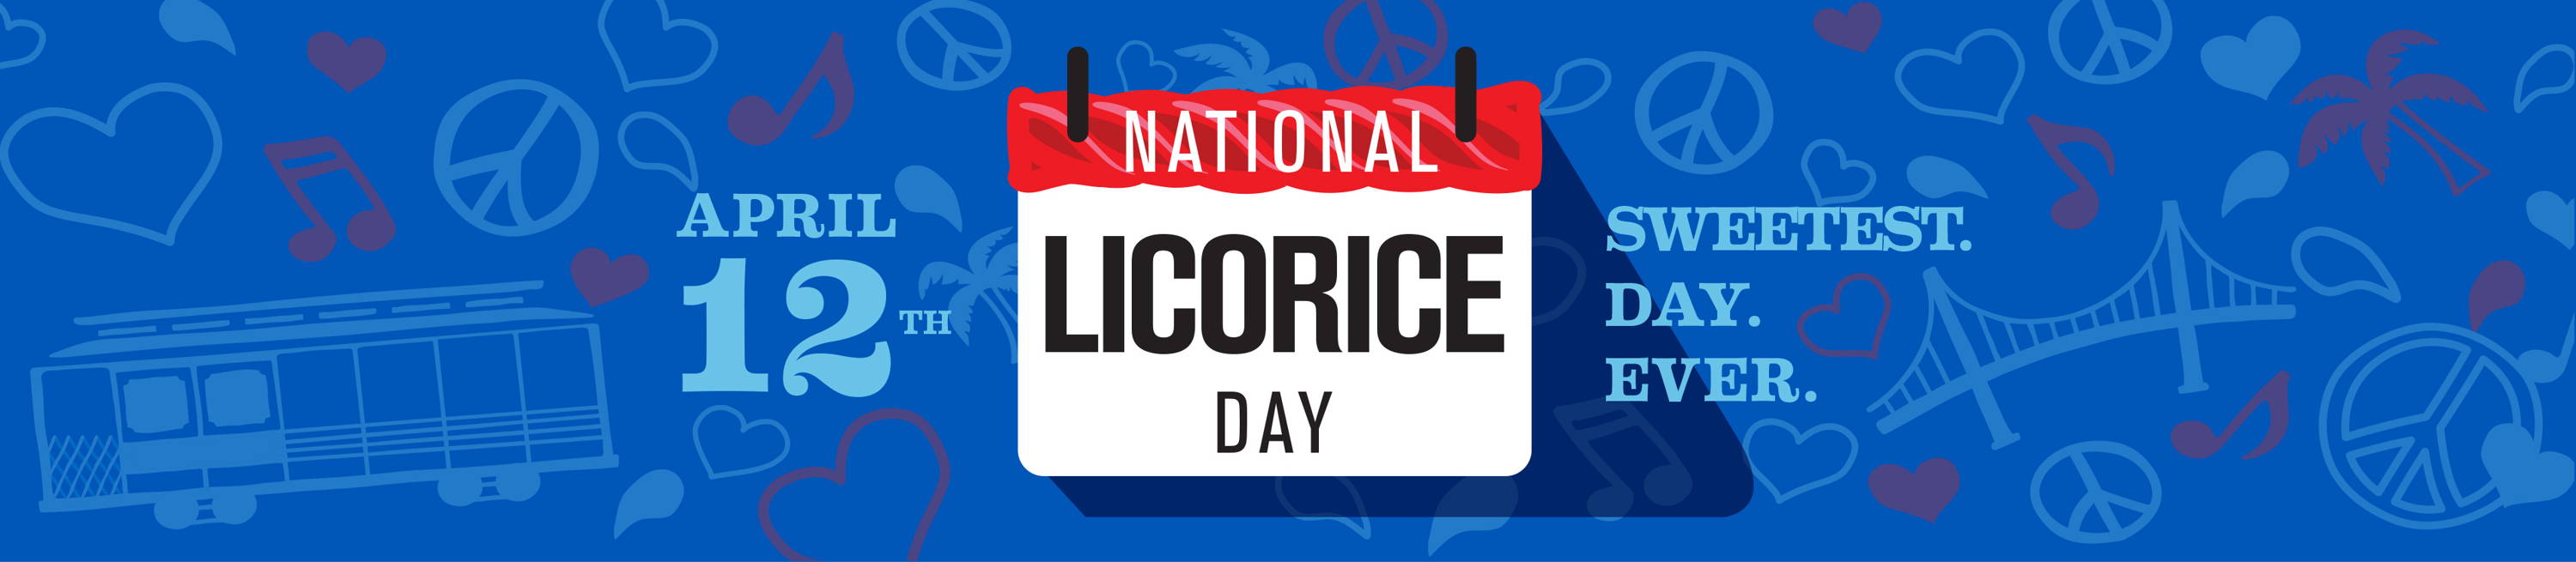 National Licorice Day, April 12th, Sweetest. Day. Ever.